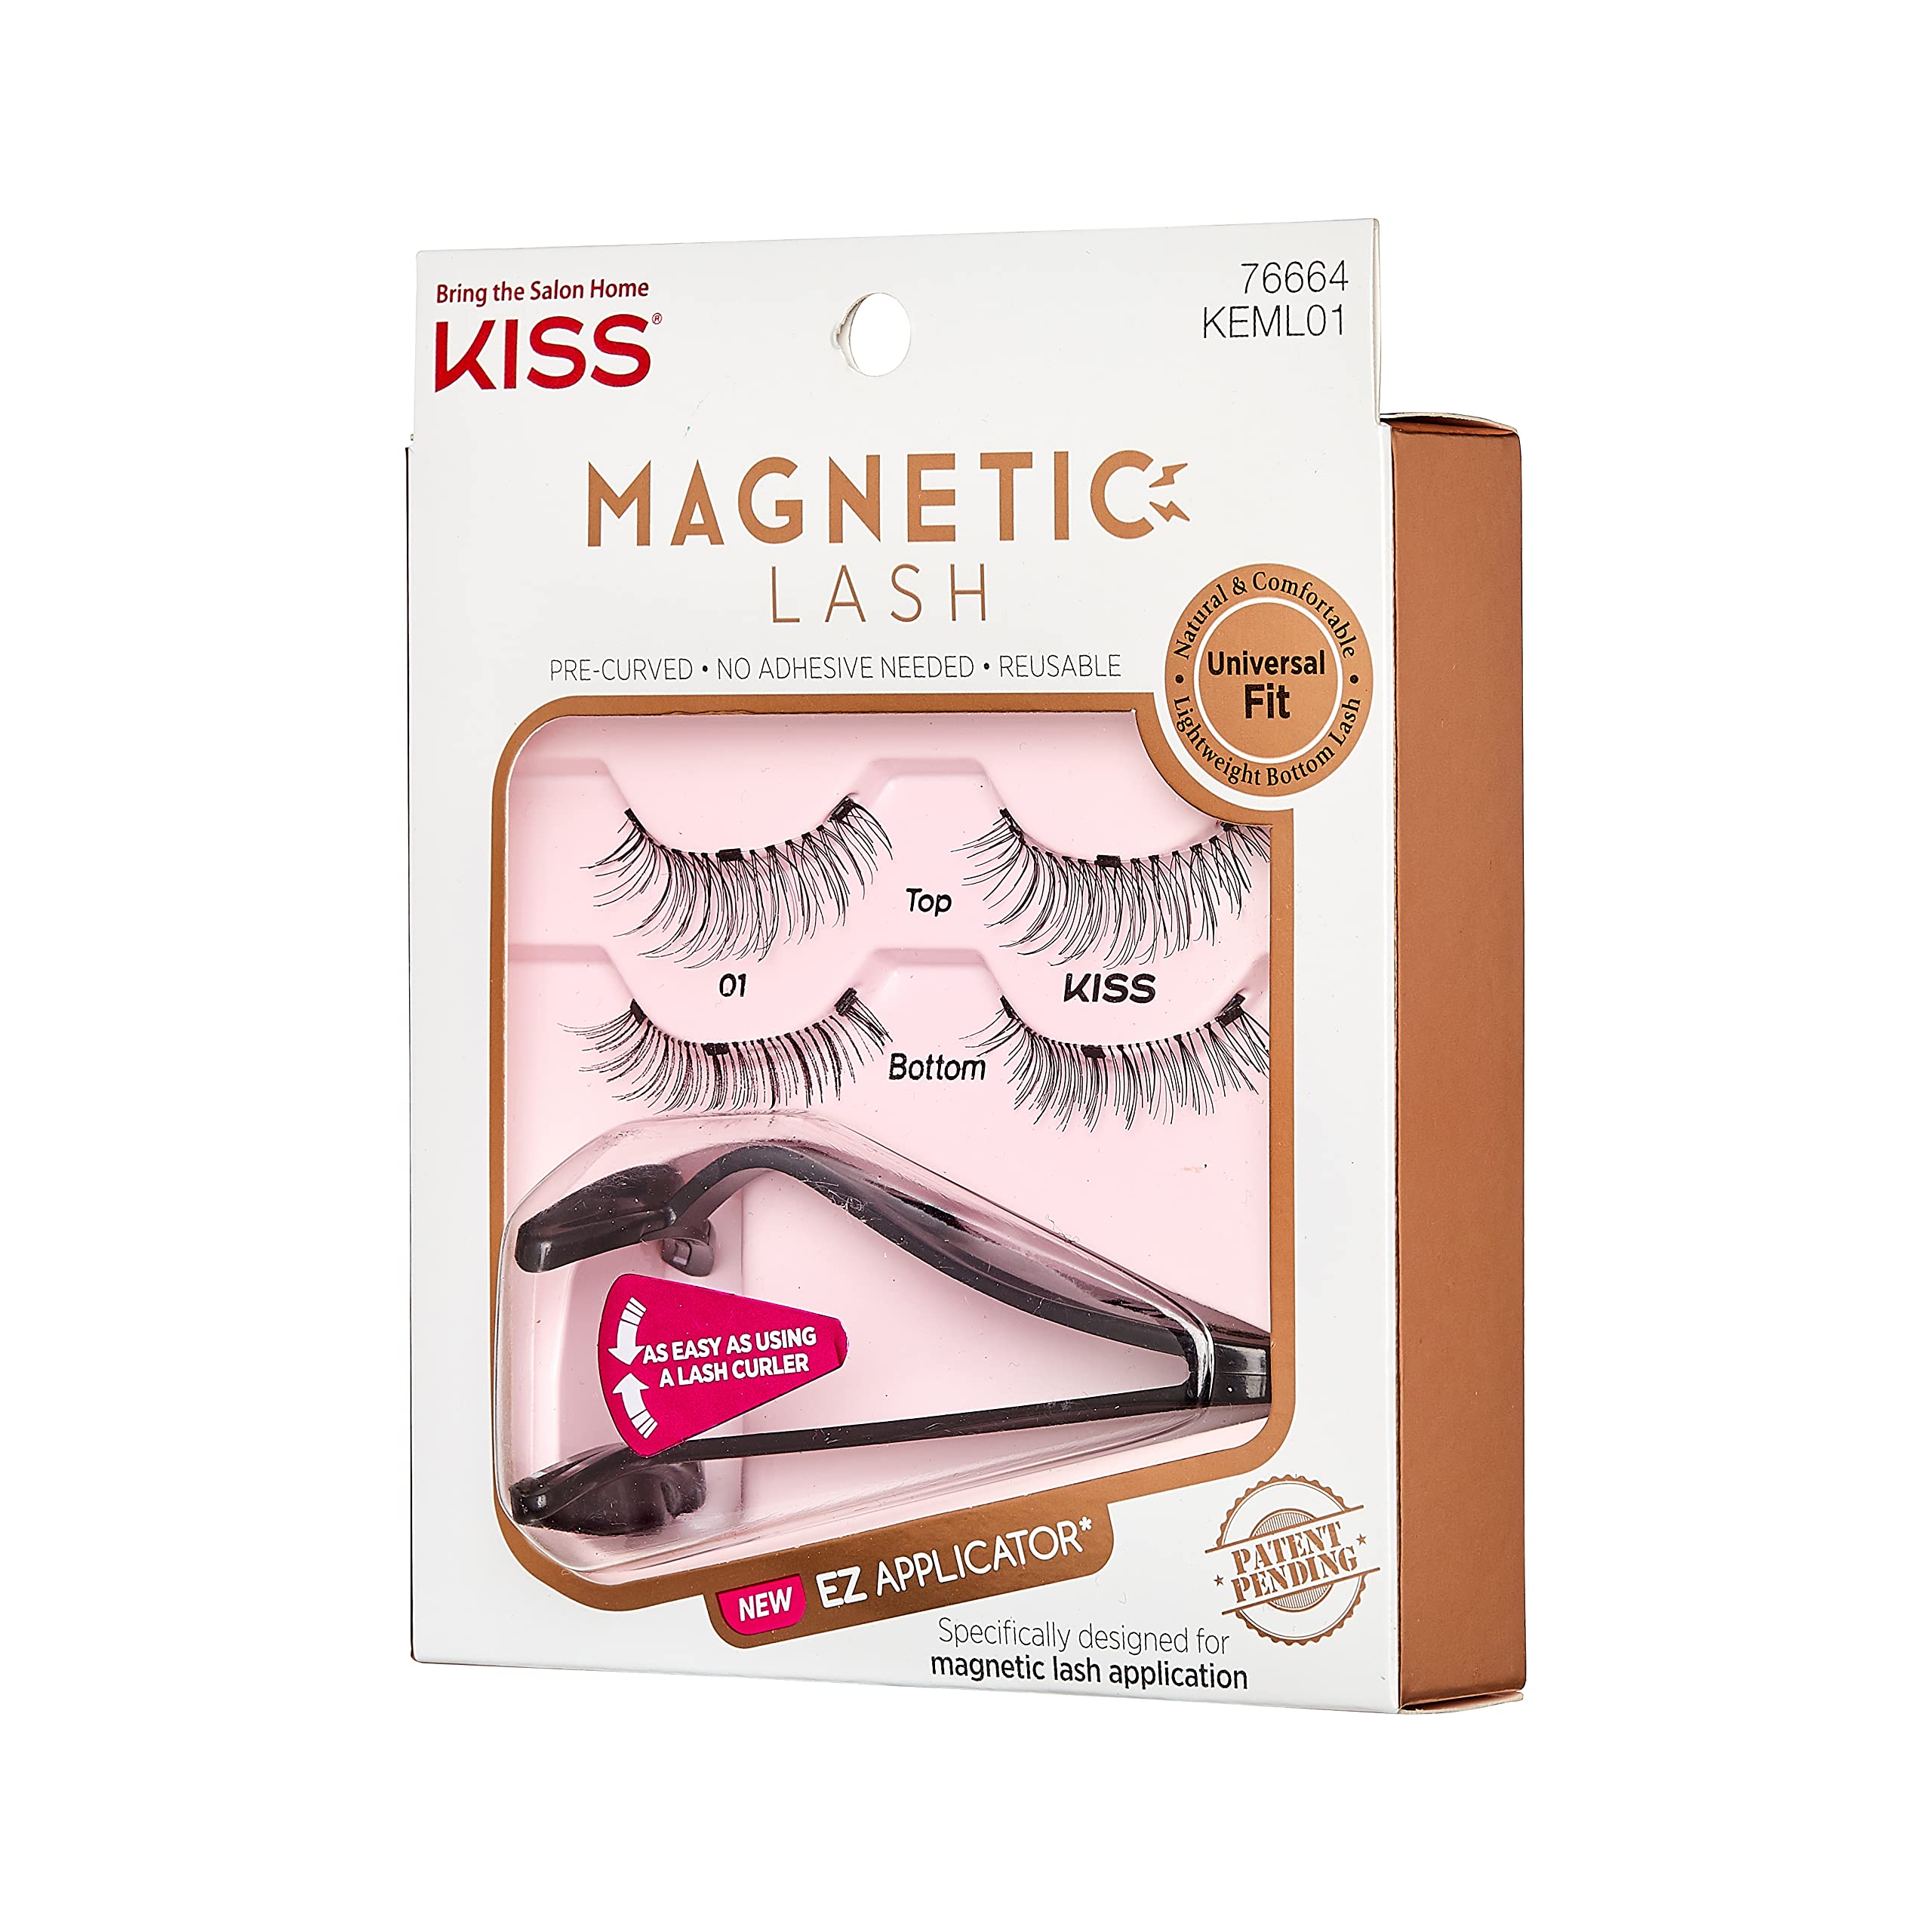 KISS Magnetic Lash 01, Synthetic False Eyelashes with Magnets Under and Over Your Upper Lashes, No Glue Needed, Lightweight, Reusable, Contact Lens Friendly, Cruelty Free, with Lash Applicator, 1 Pair